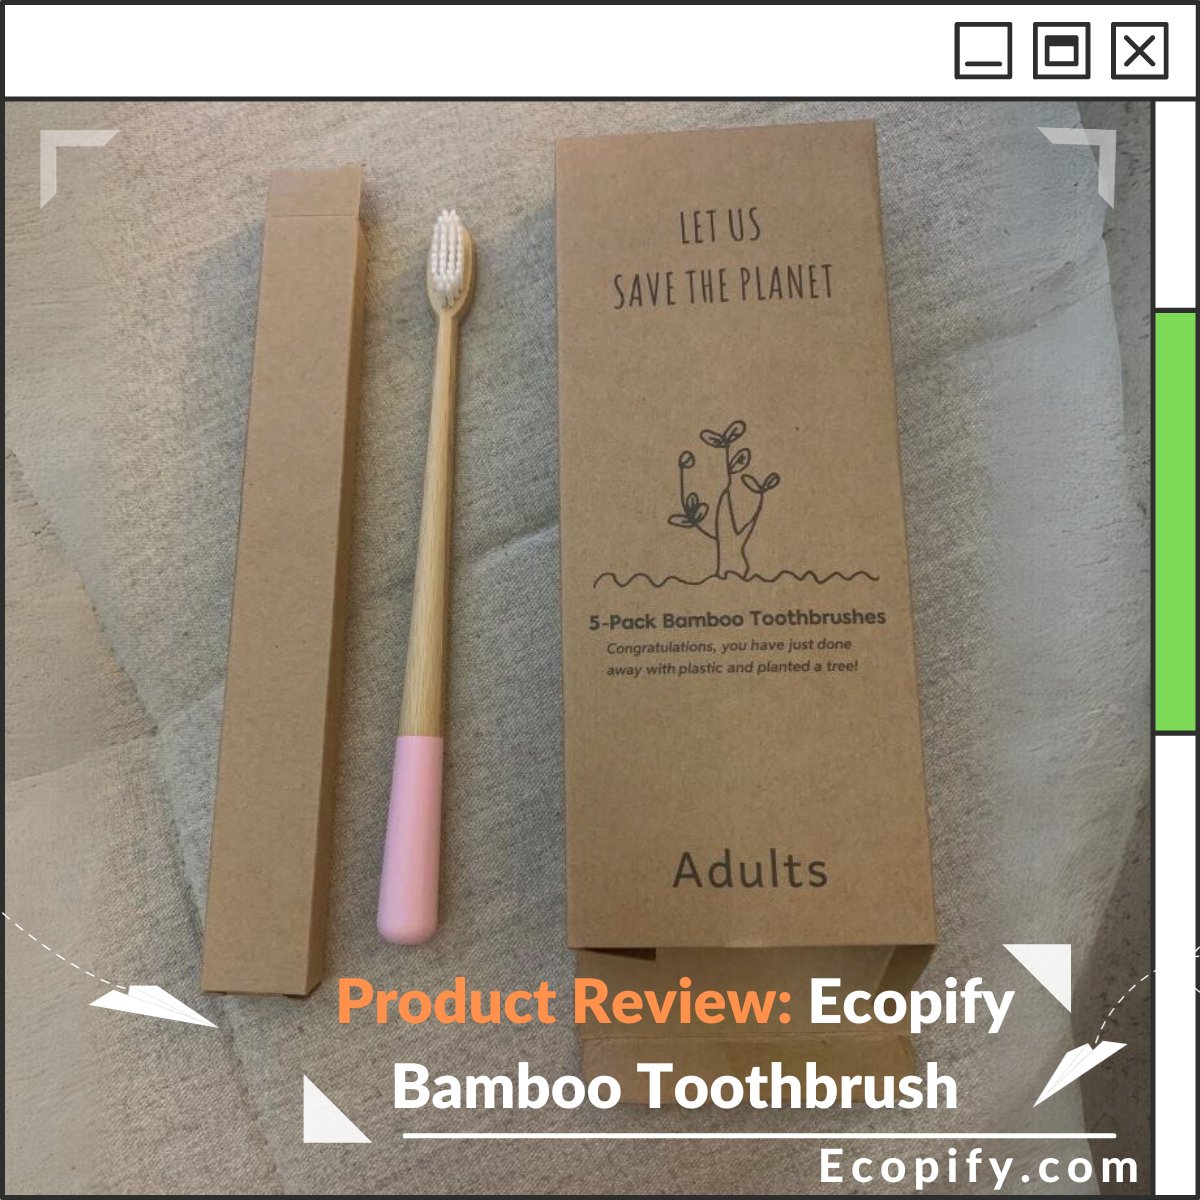 Product Review: Ecopify Bamboo Toothbrush